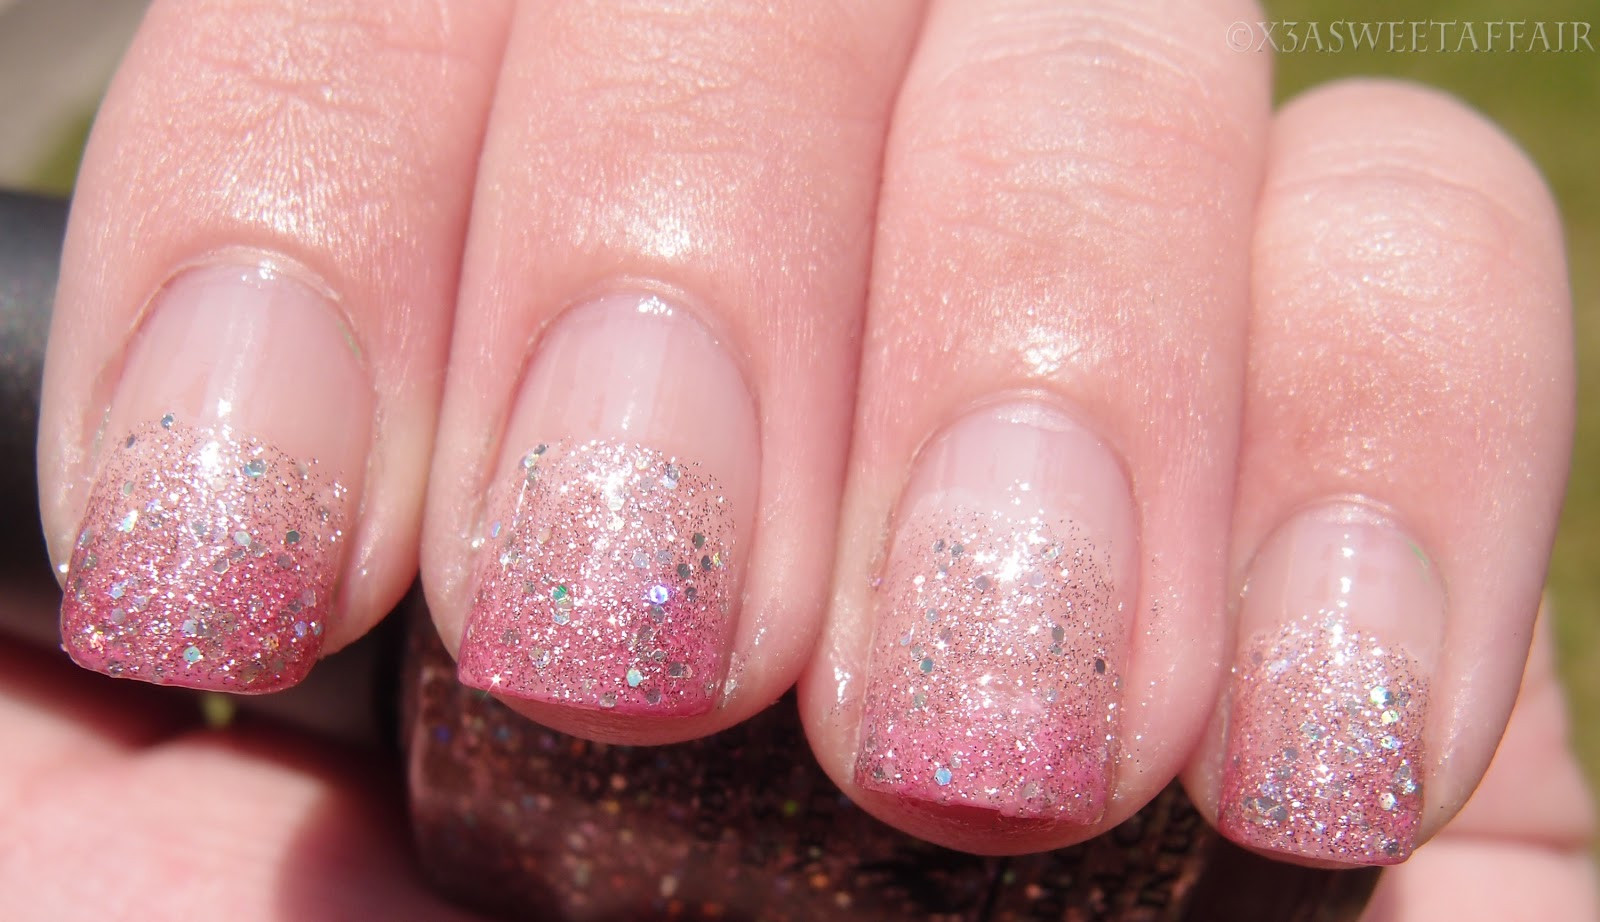 Pink Glitter Ombre Nails
 x3ASweetAffair Naturally Nails Pink ombre glitter